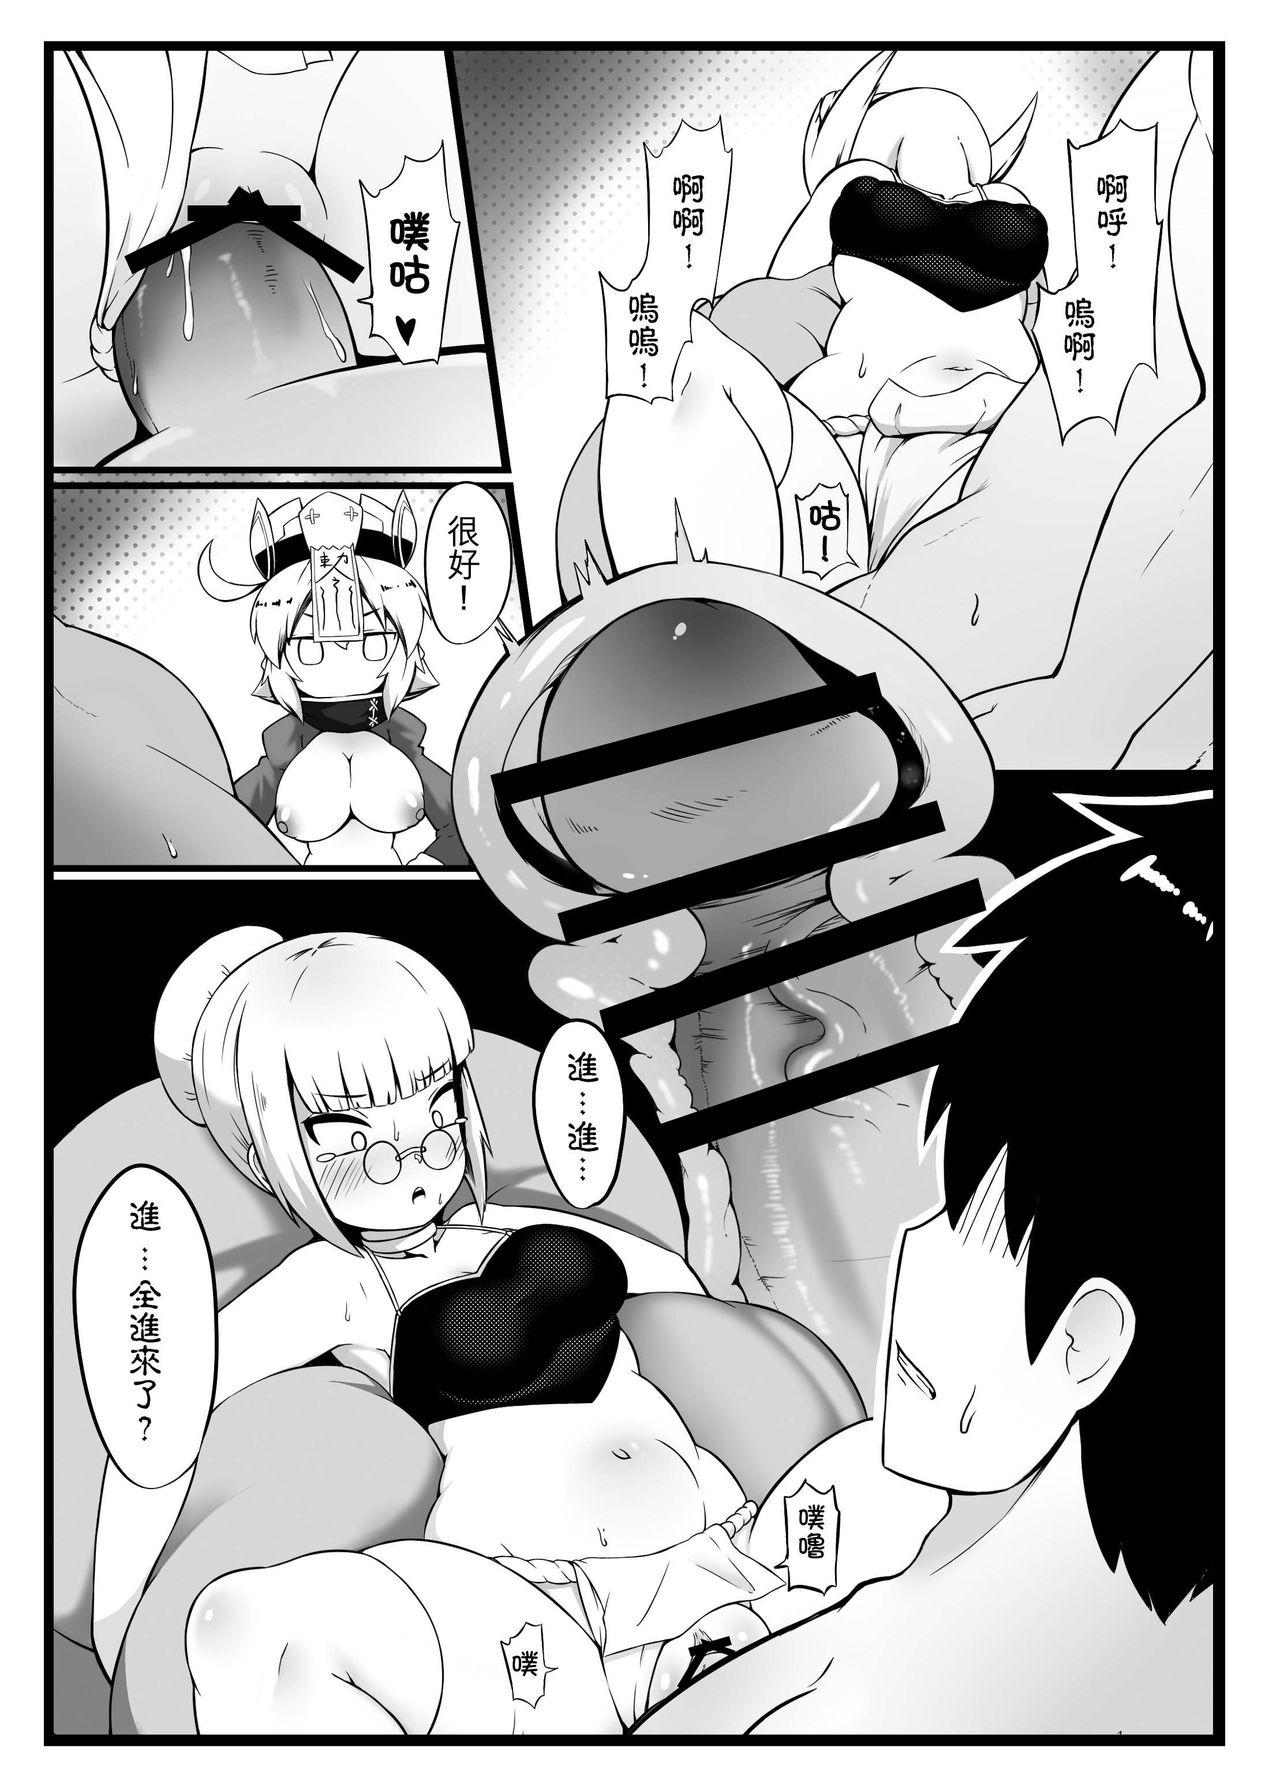 Best Blowjob Ever Make baby with my oppai loli old aunt 3 - Original Gay Group - Page 11